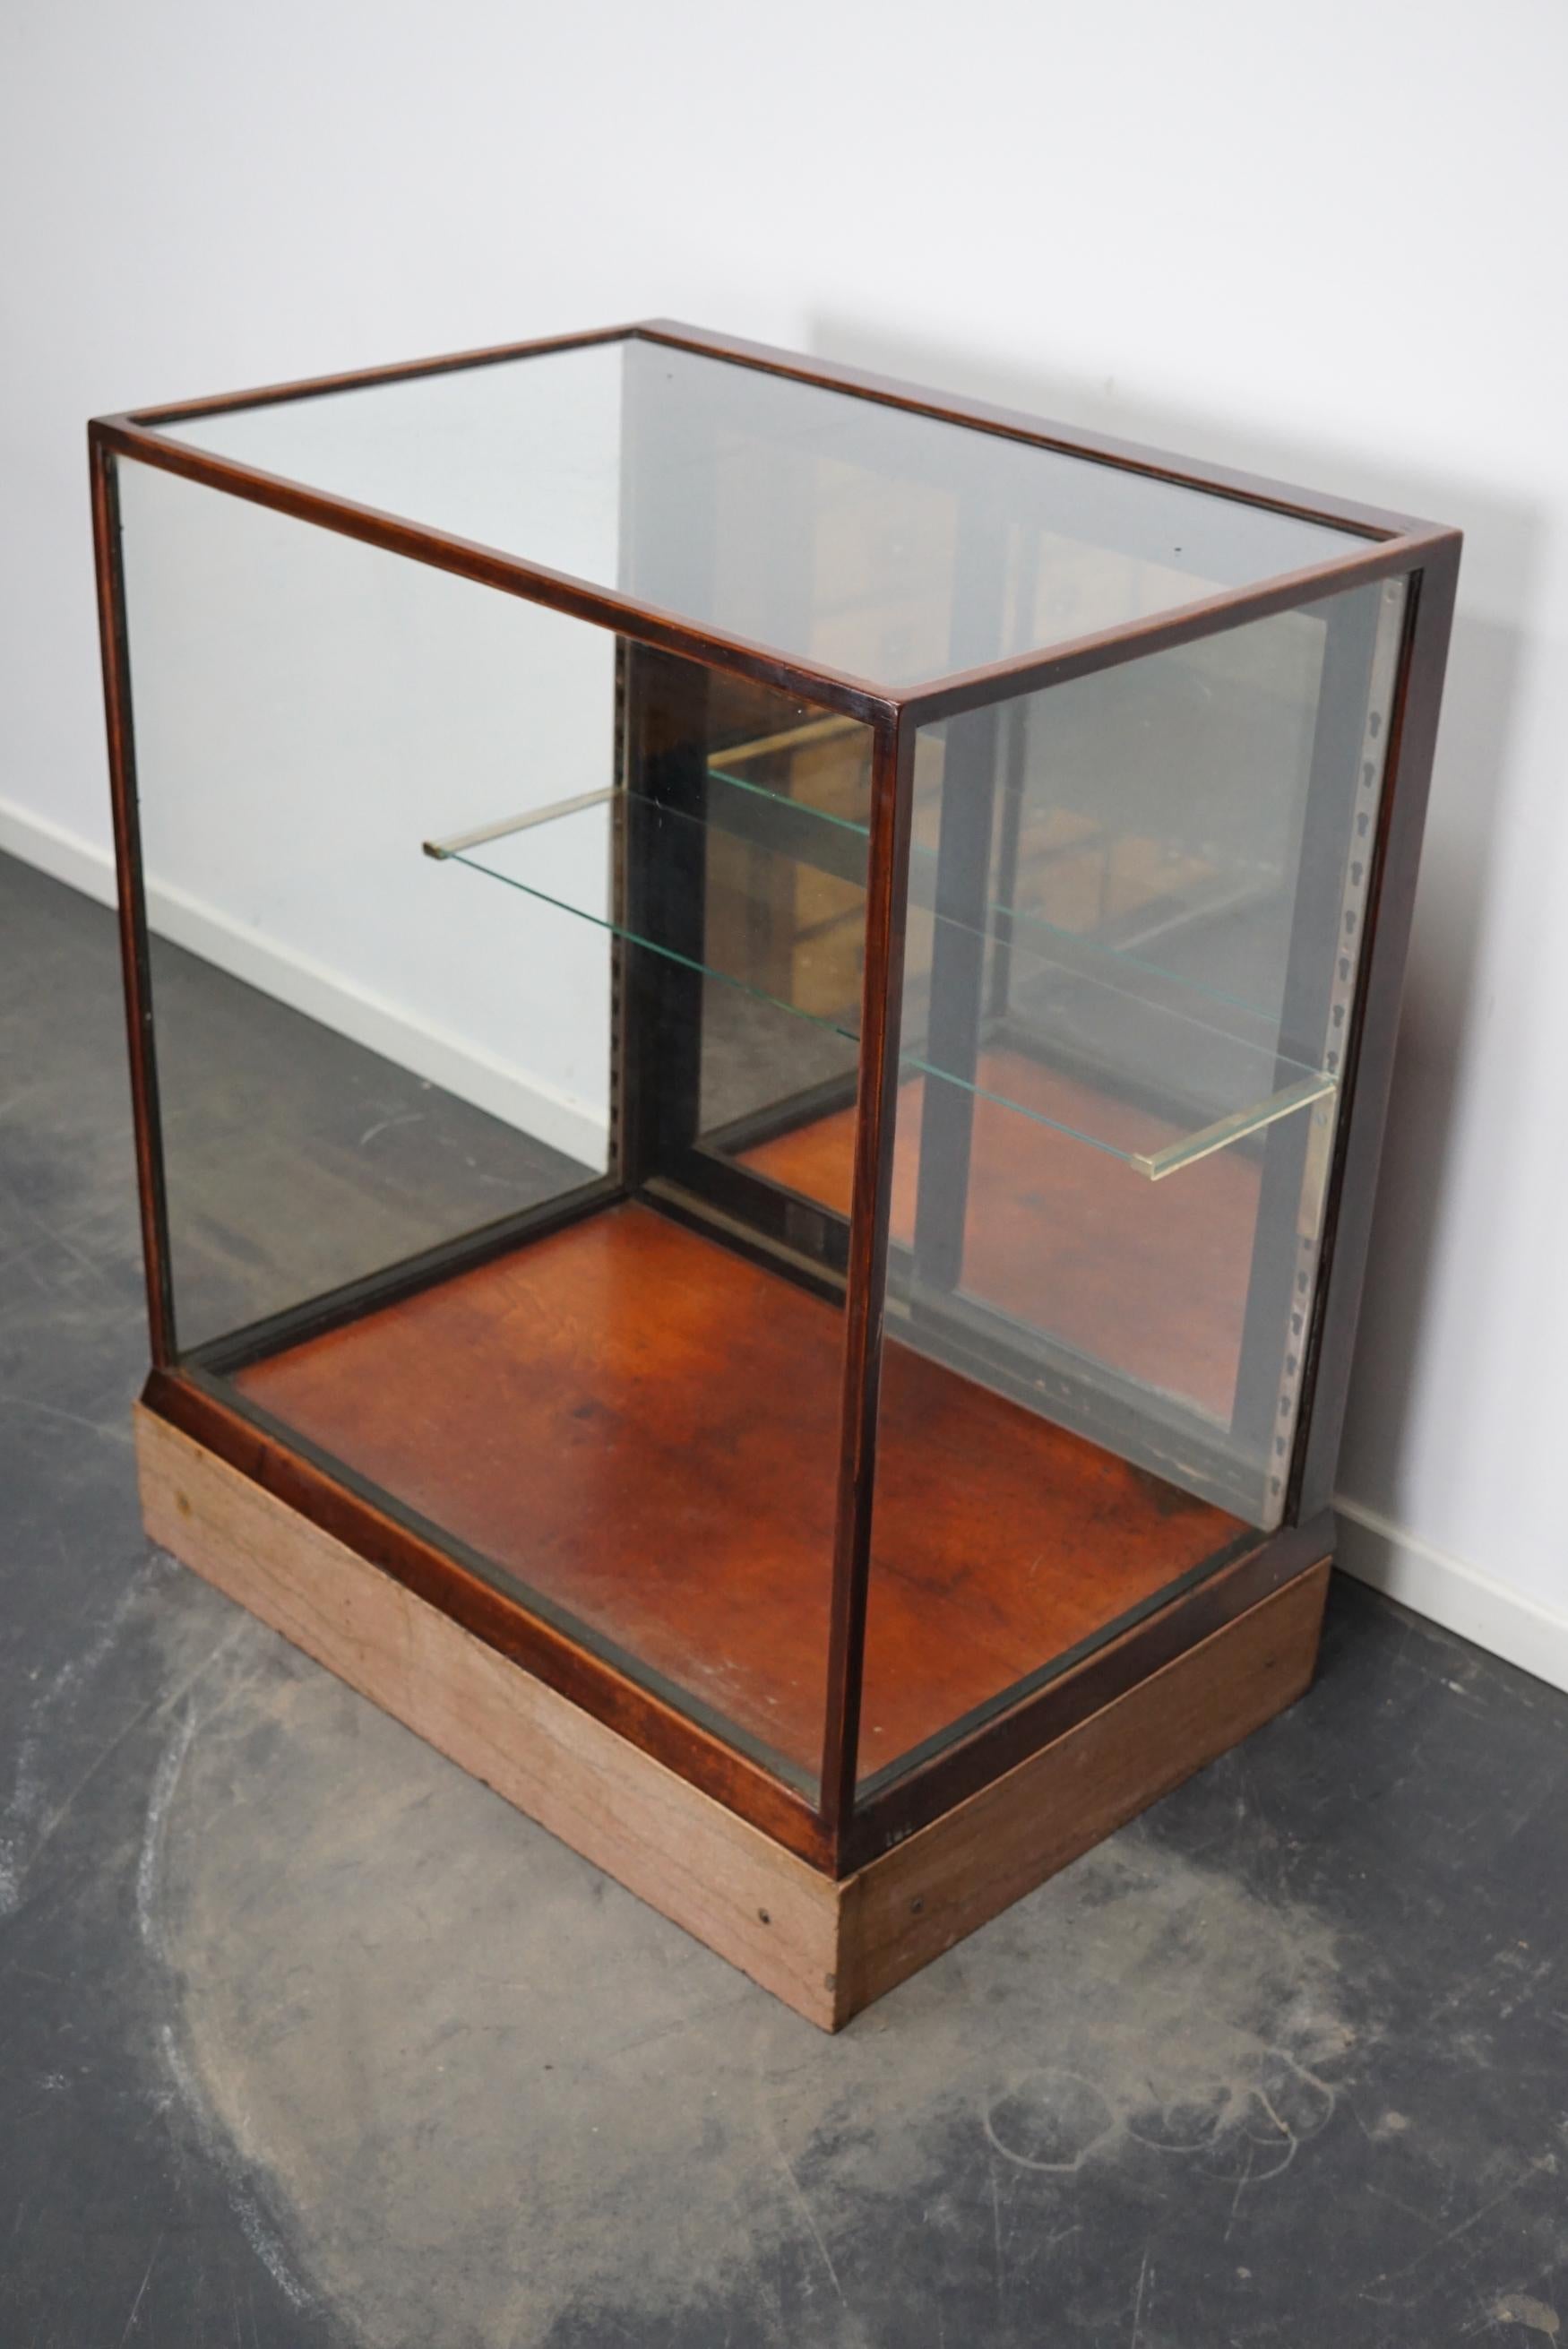 Victorian Mahogany Shop Display Cabinet / Counter or Vitrine, Late 19th Century In Good Condition For Sale In Nijmegen, NL